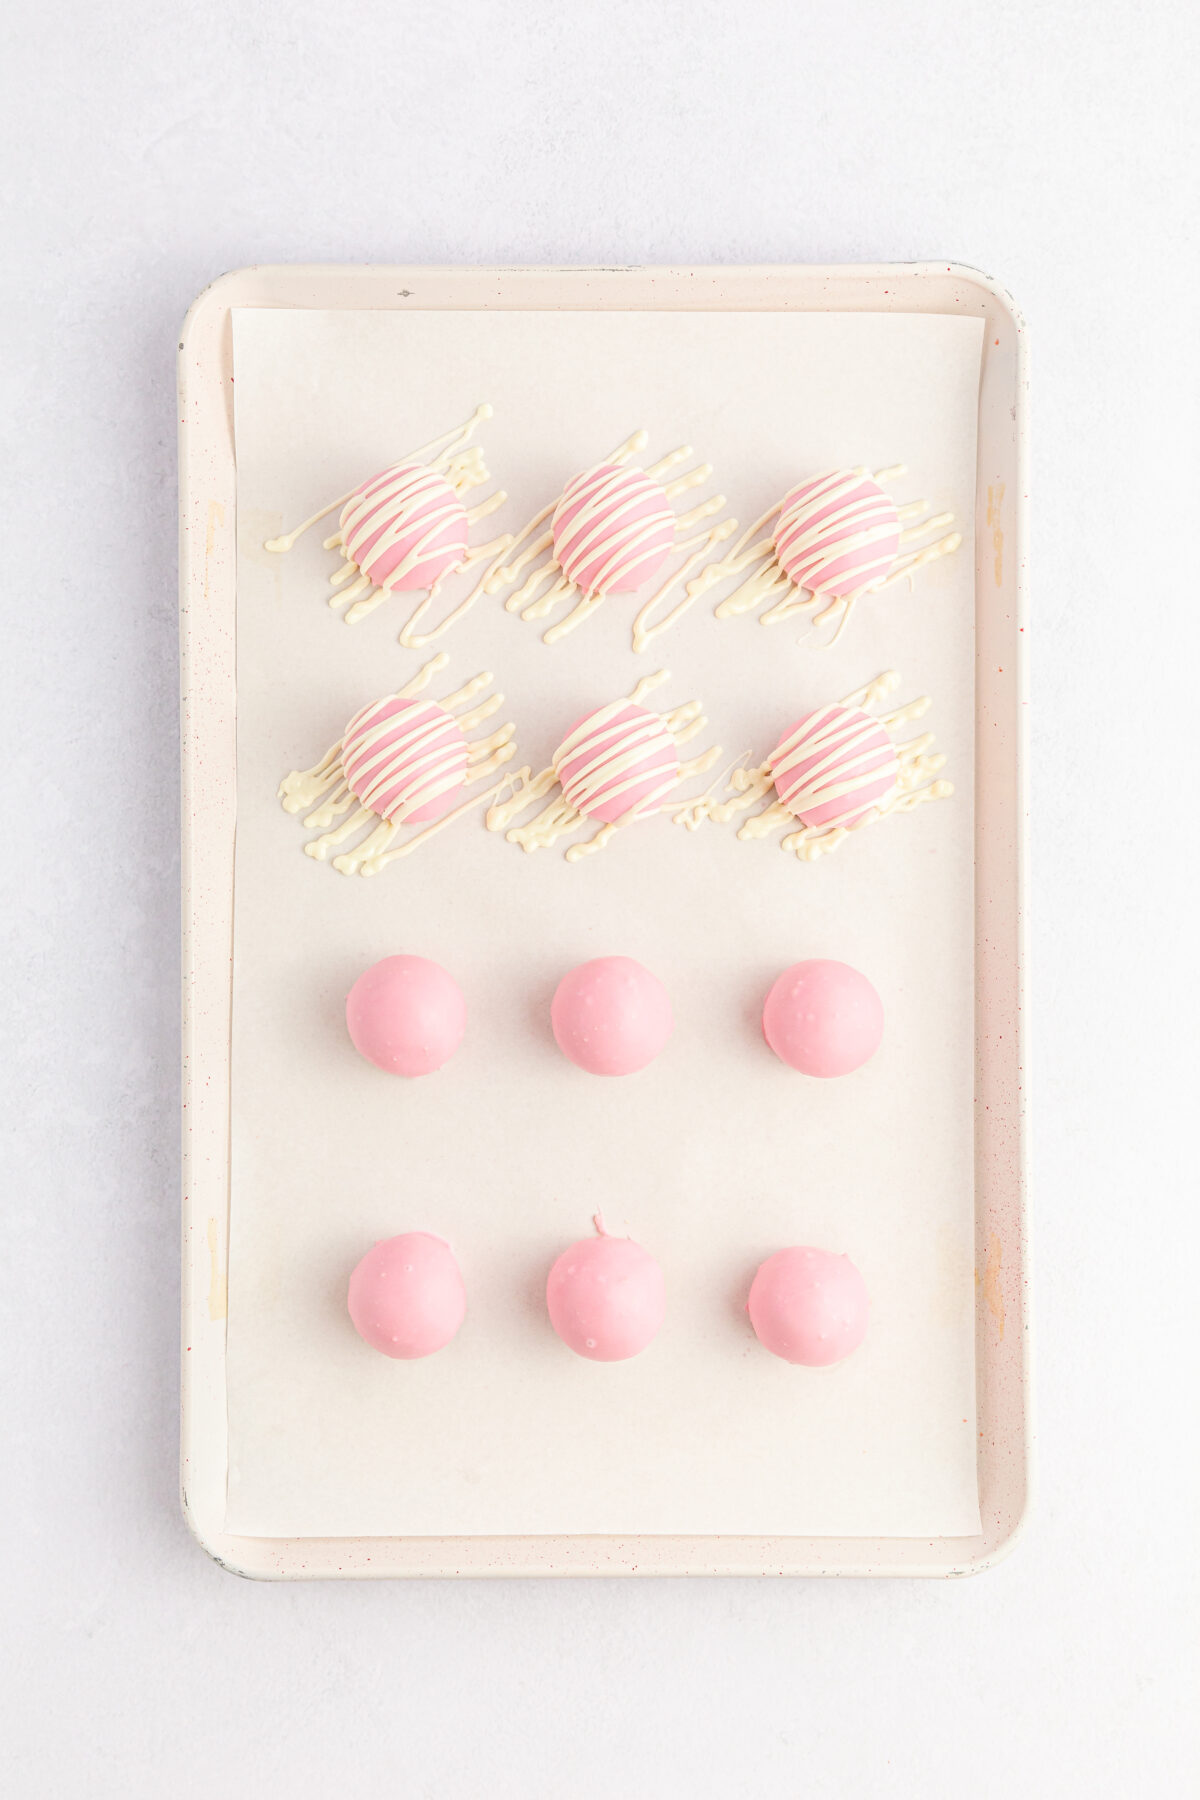 Candy coated dough balls on a sheet pan, half drizzled over with white chocolate.